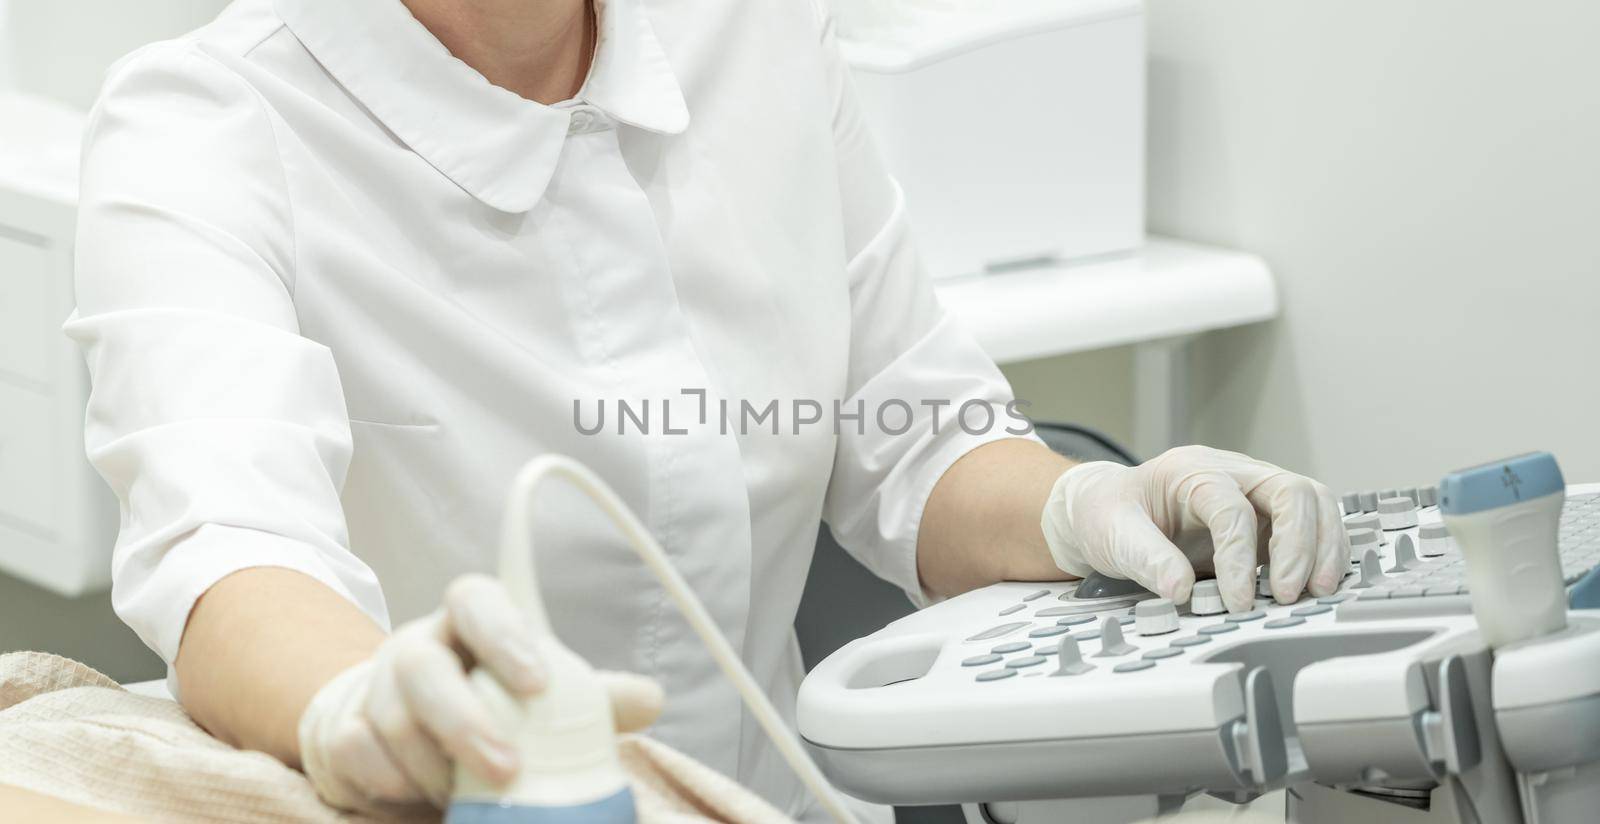 Doctor operating Ultrasound scanner for patient diagnostic by Mariakray